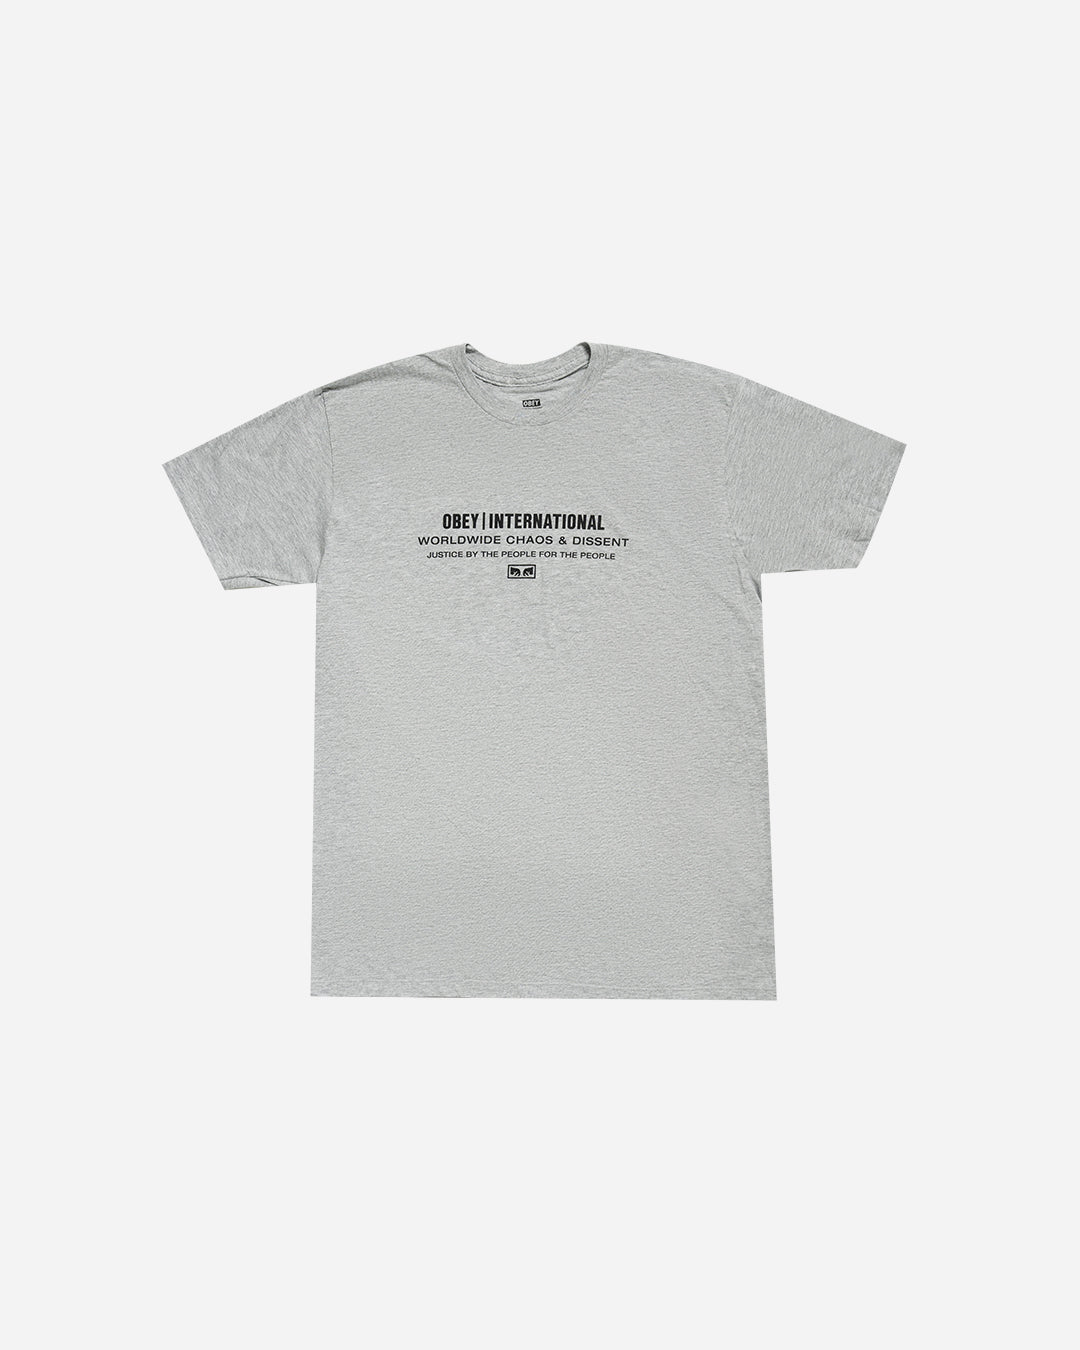 JUSTICE BY THE PEOPLE TEE